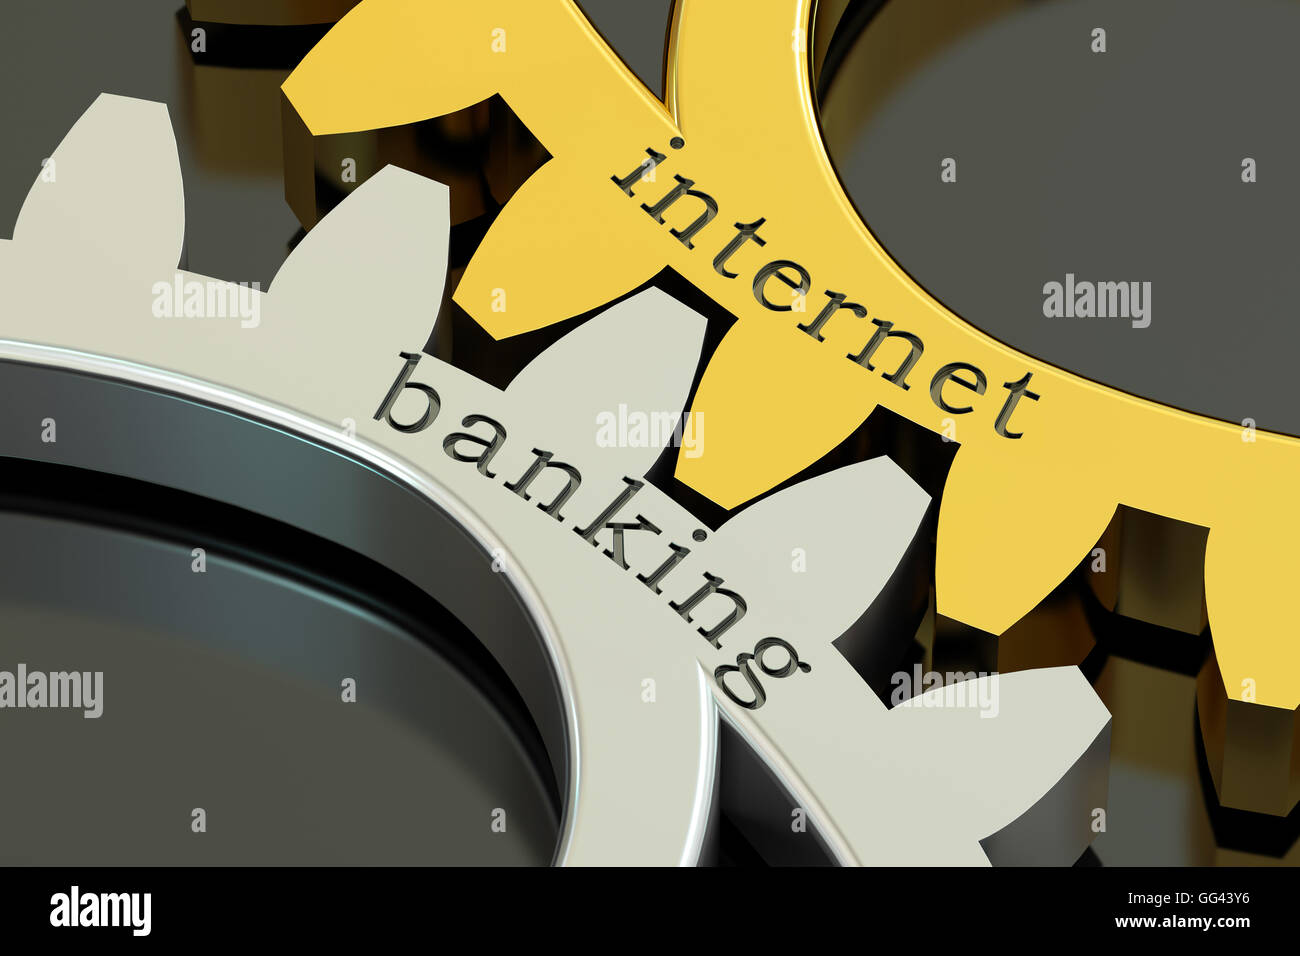 Internet Banking concept on the gearwheels, 3D rendering Stock Photo